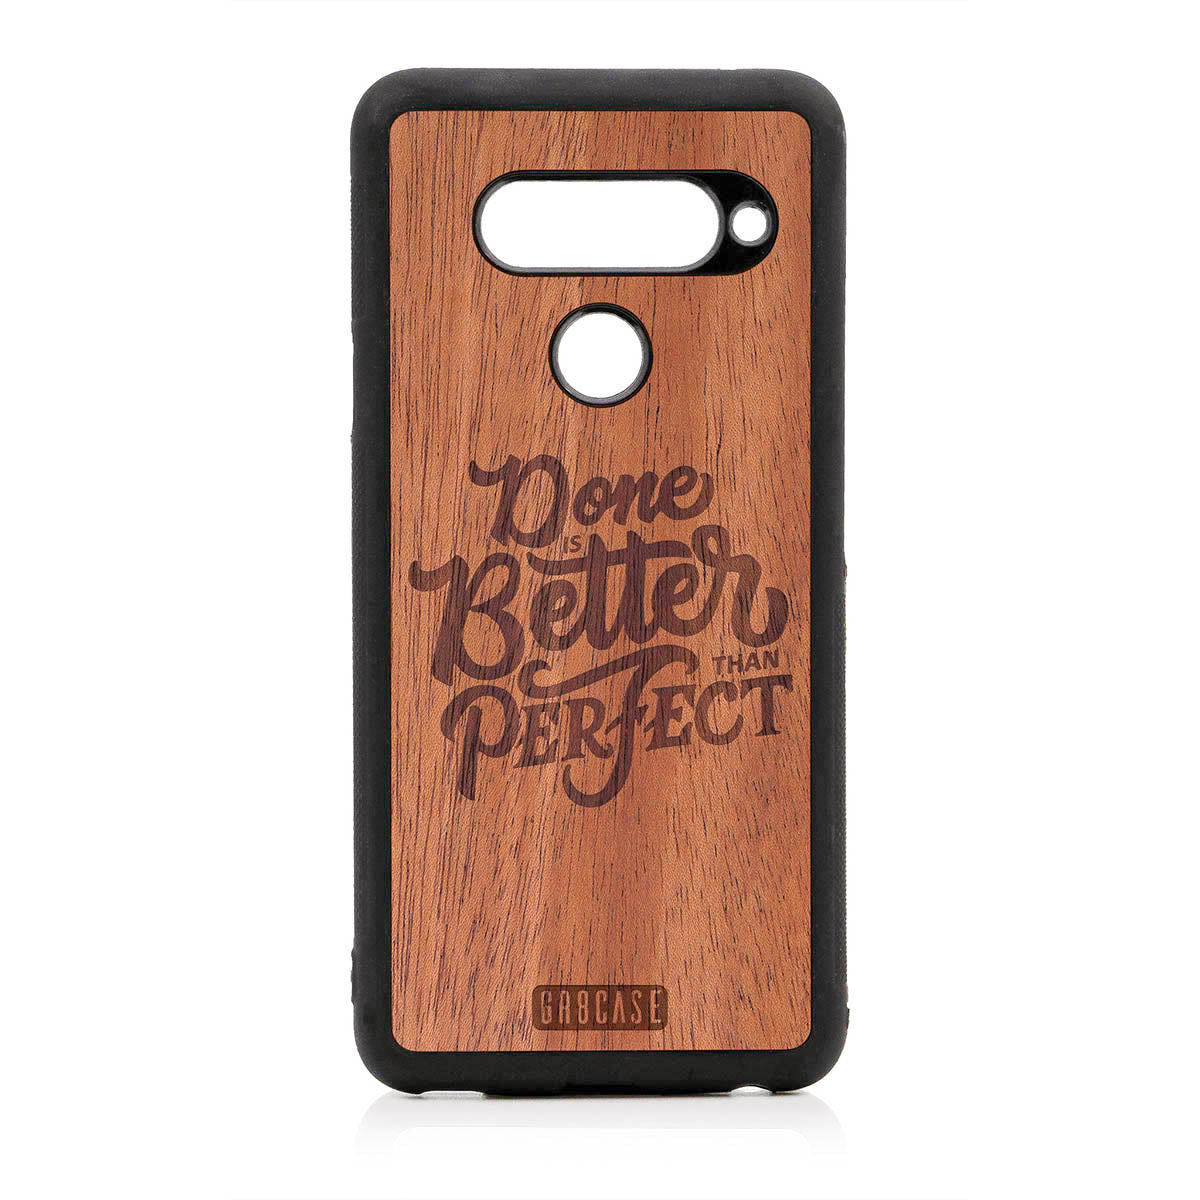 Done Is Better Than Perfect Design Wood Case For LG V40 by GR8CASE